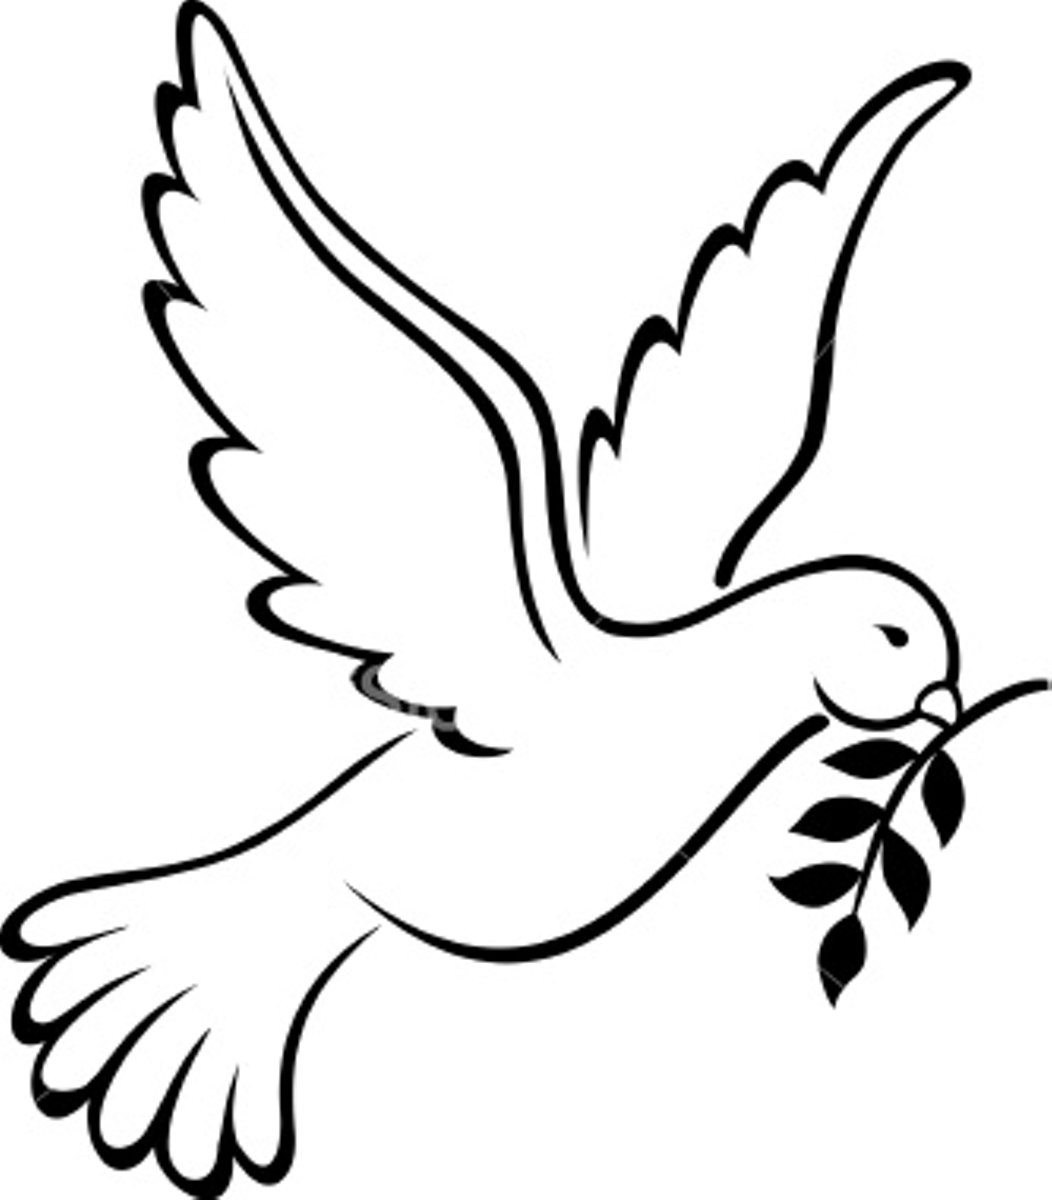 ist2_4364427-dove-symbol-of-peace-on-earth.jpg - zeriaph 